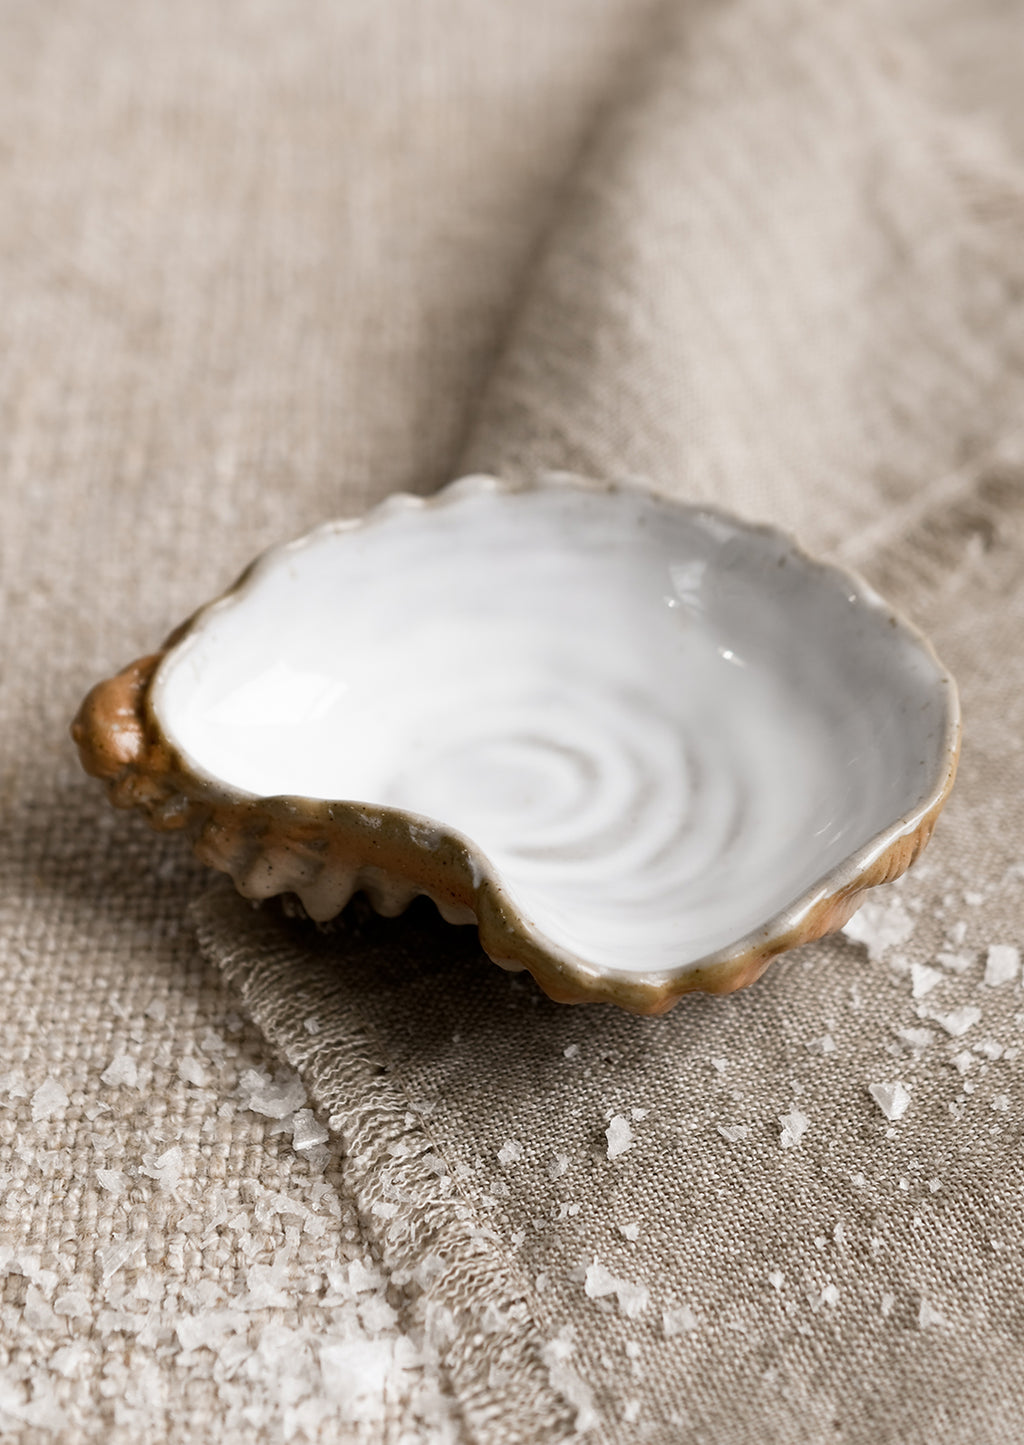 Mignonette Dish: A small ceramic serving dish in shape of an oyster shell.